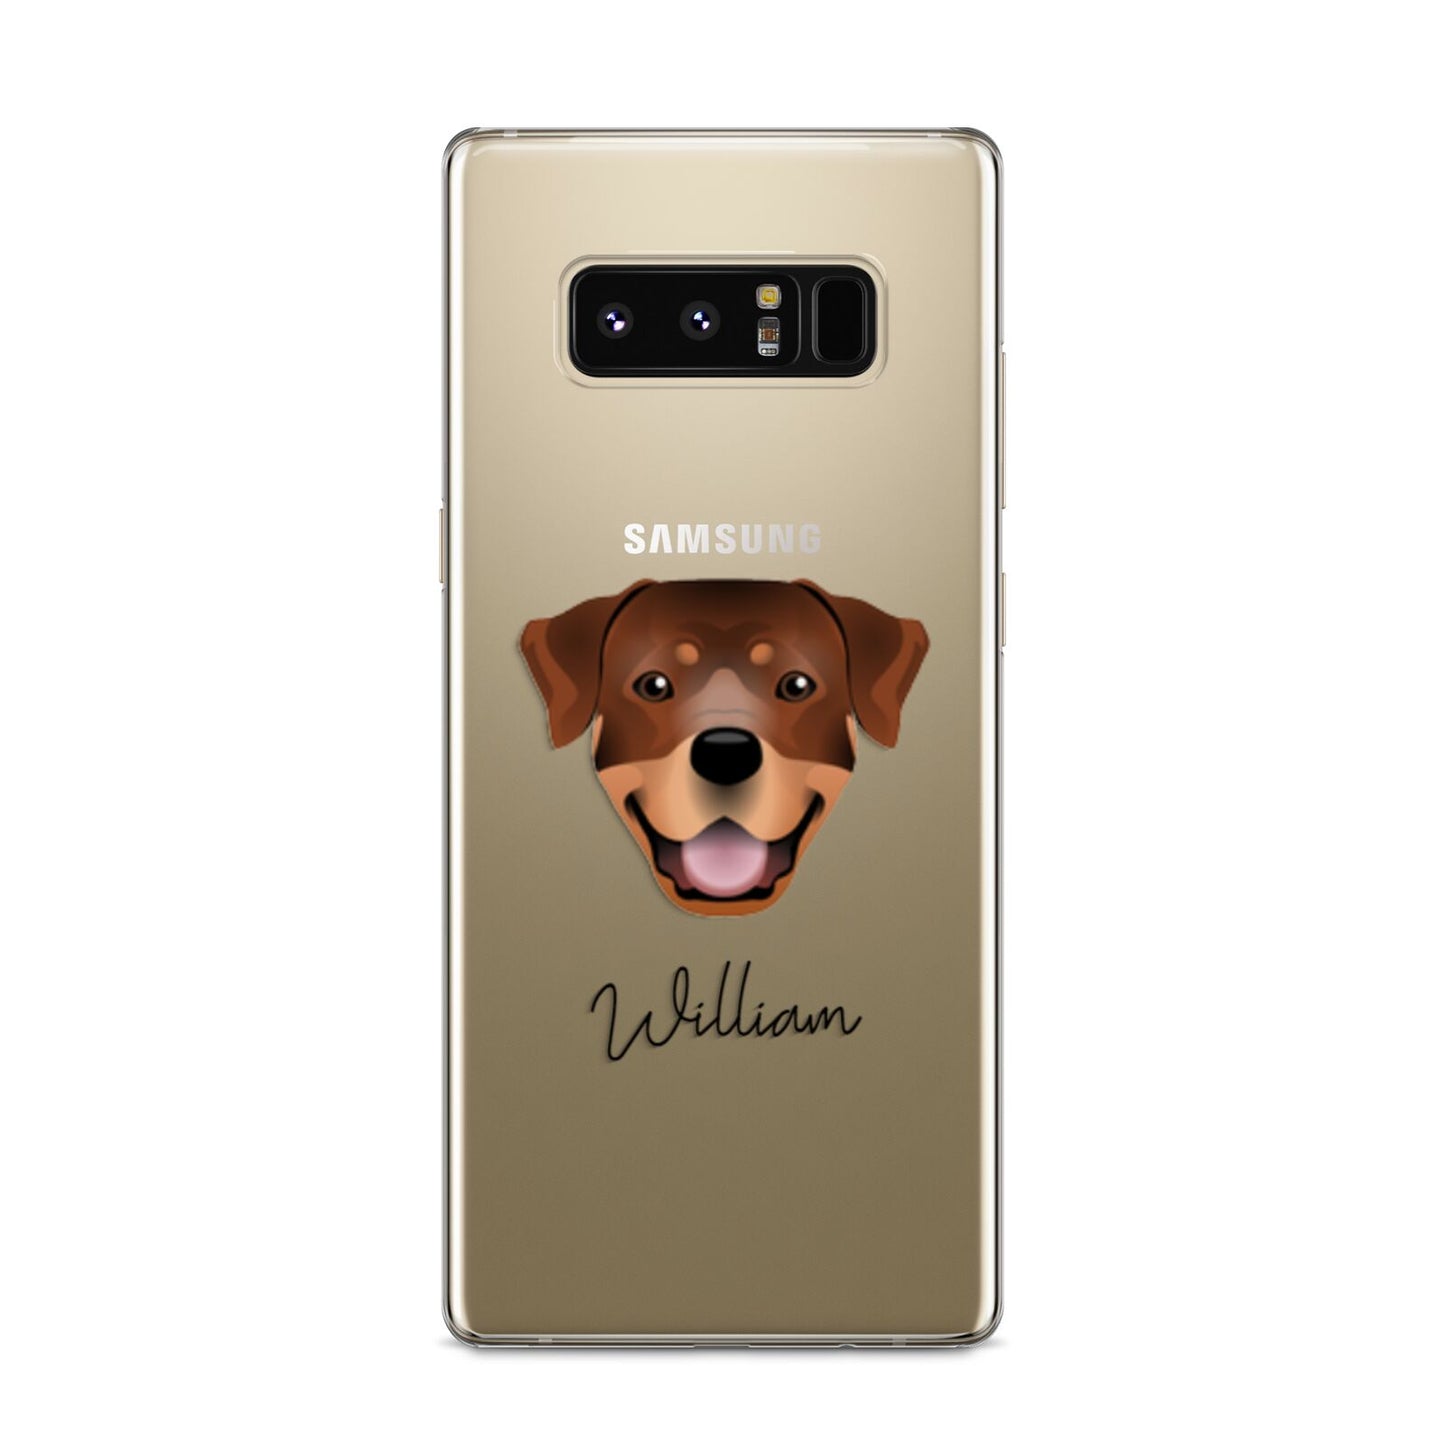 Rottweiler Personalised Samsung Galaxy S8 Case